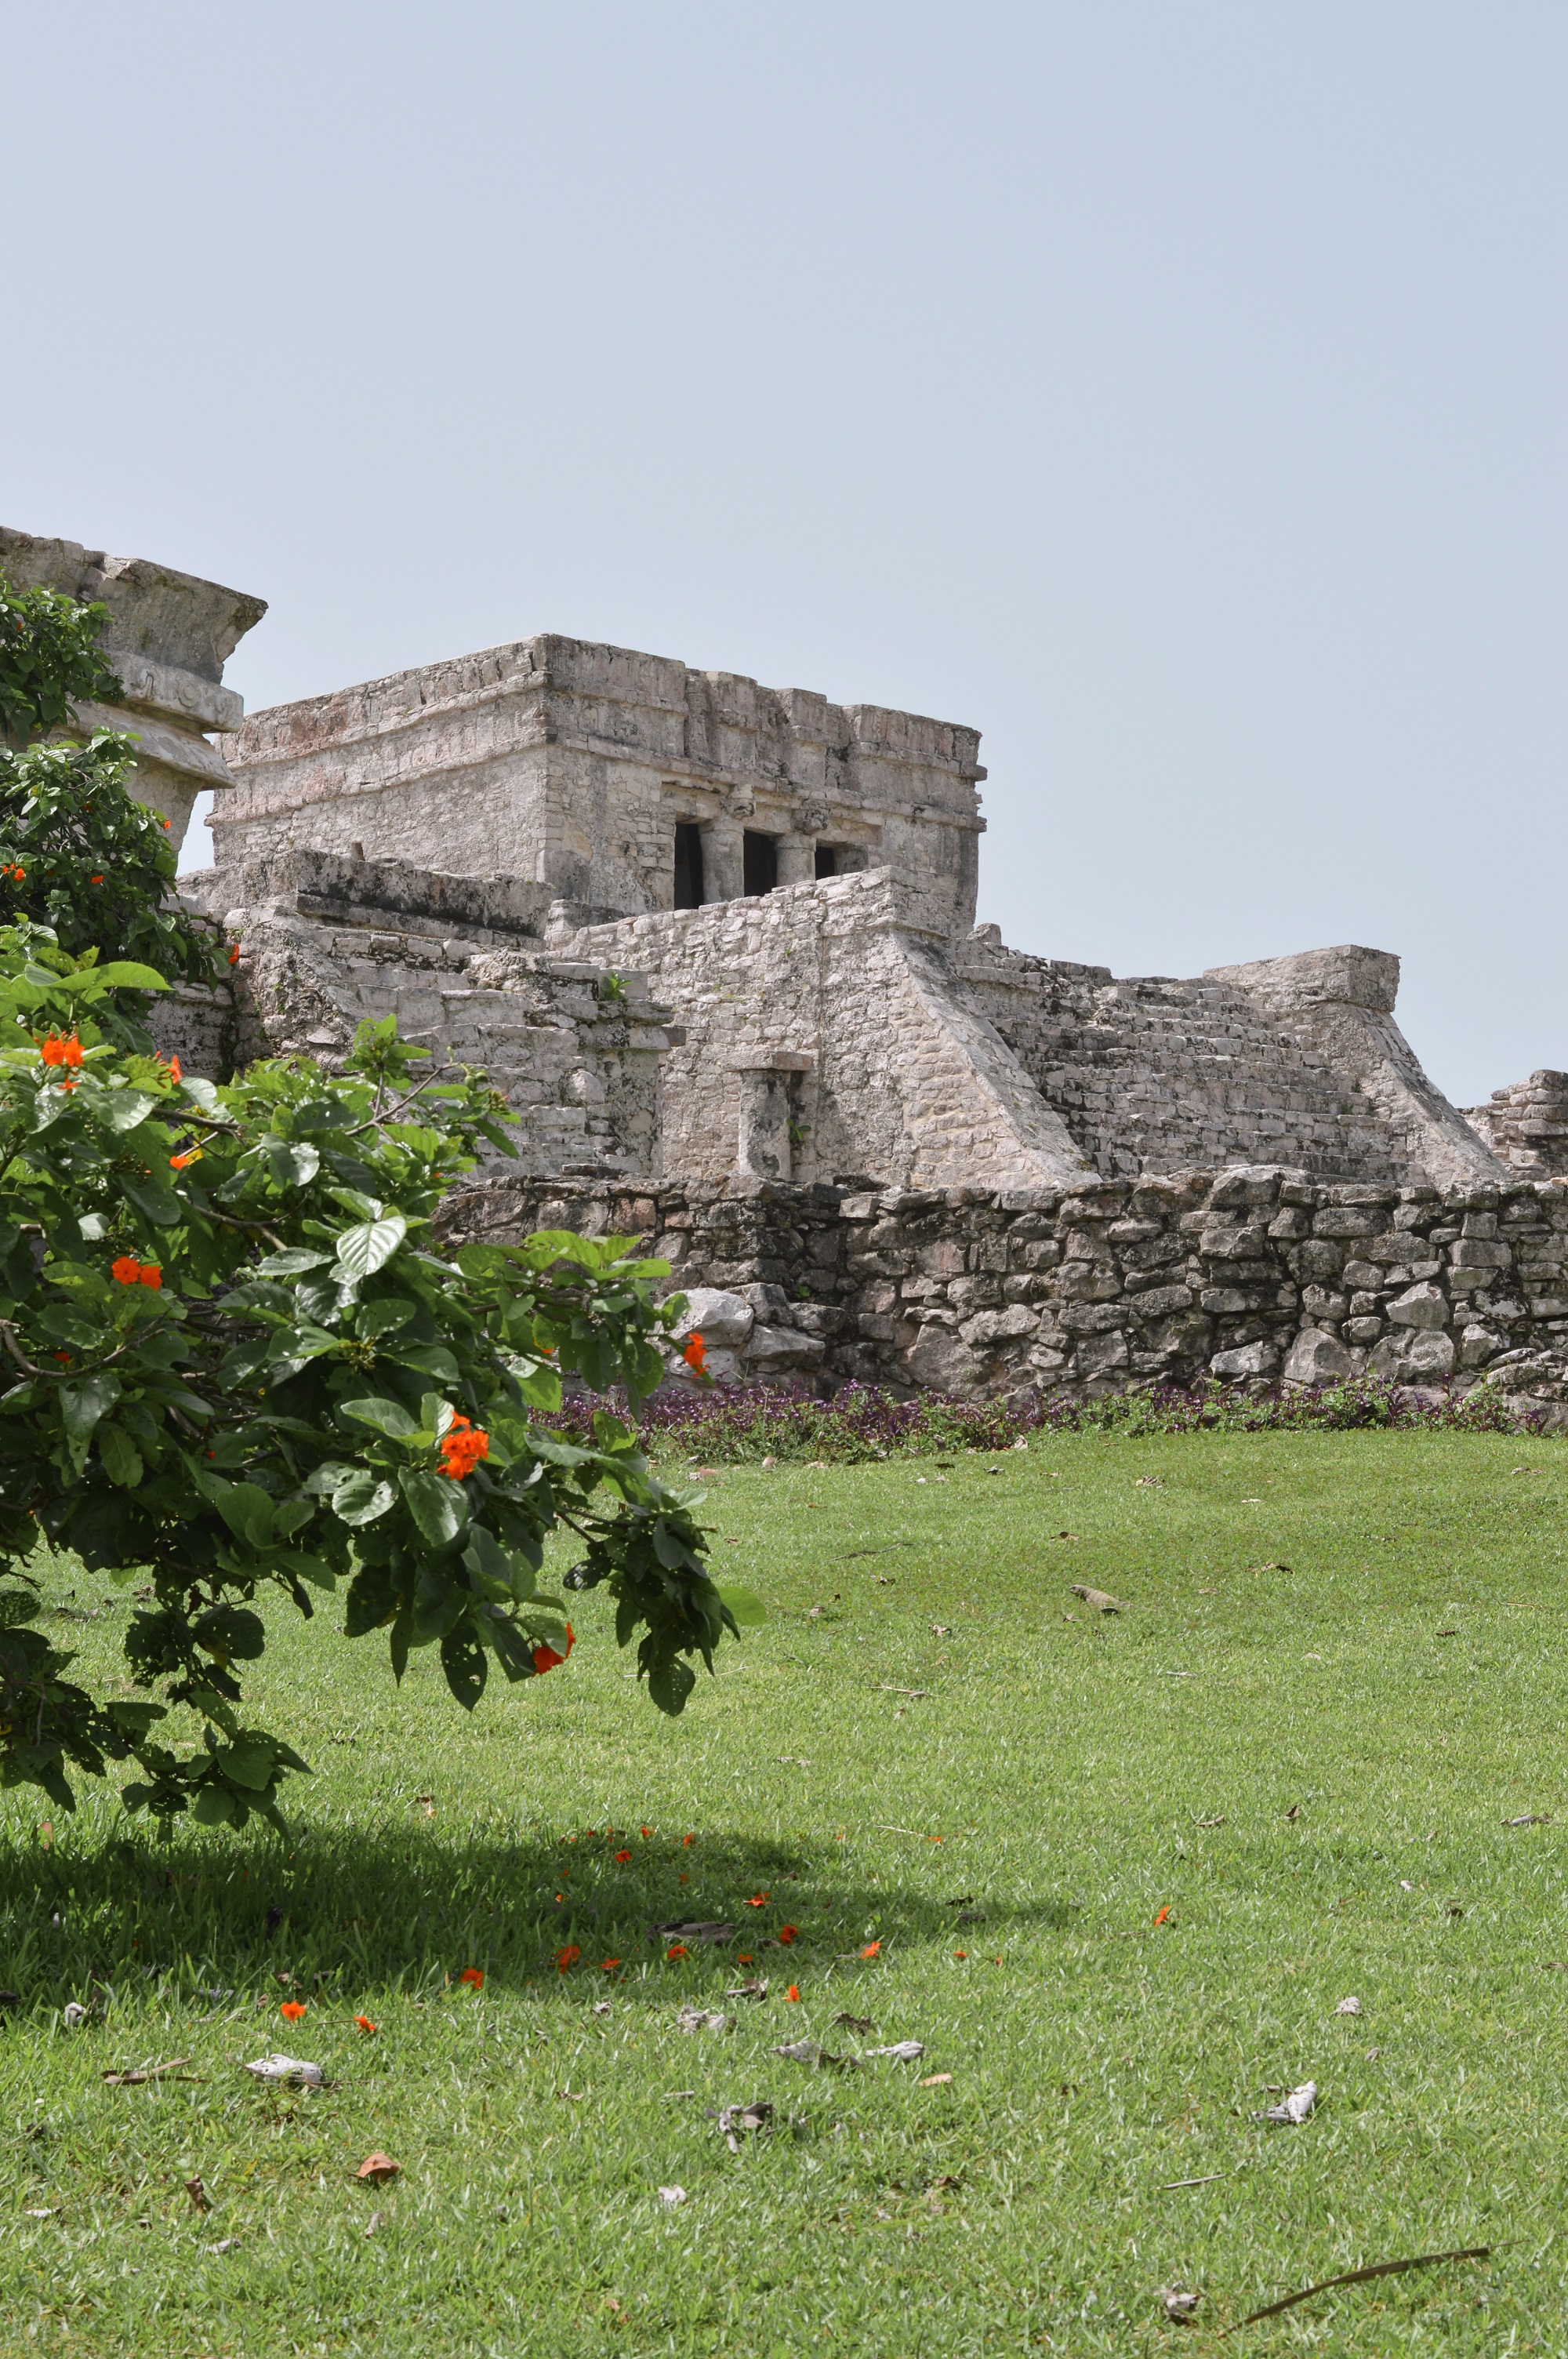 A flowering tree in front of the Tulum Ruins